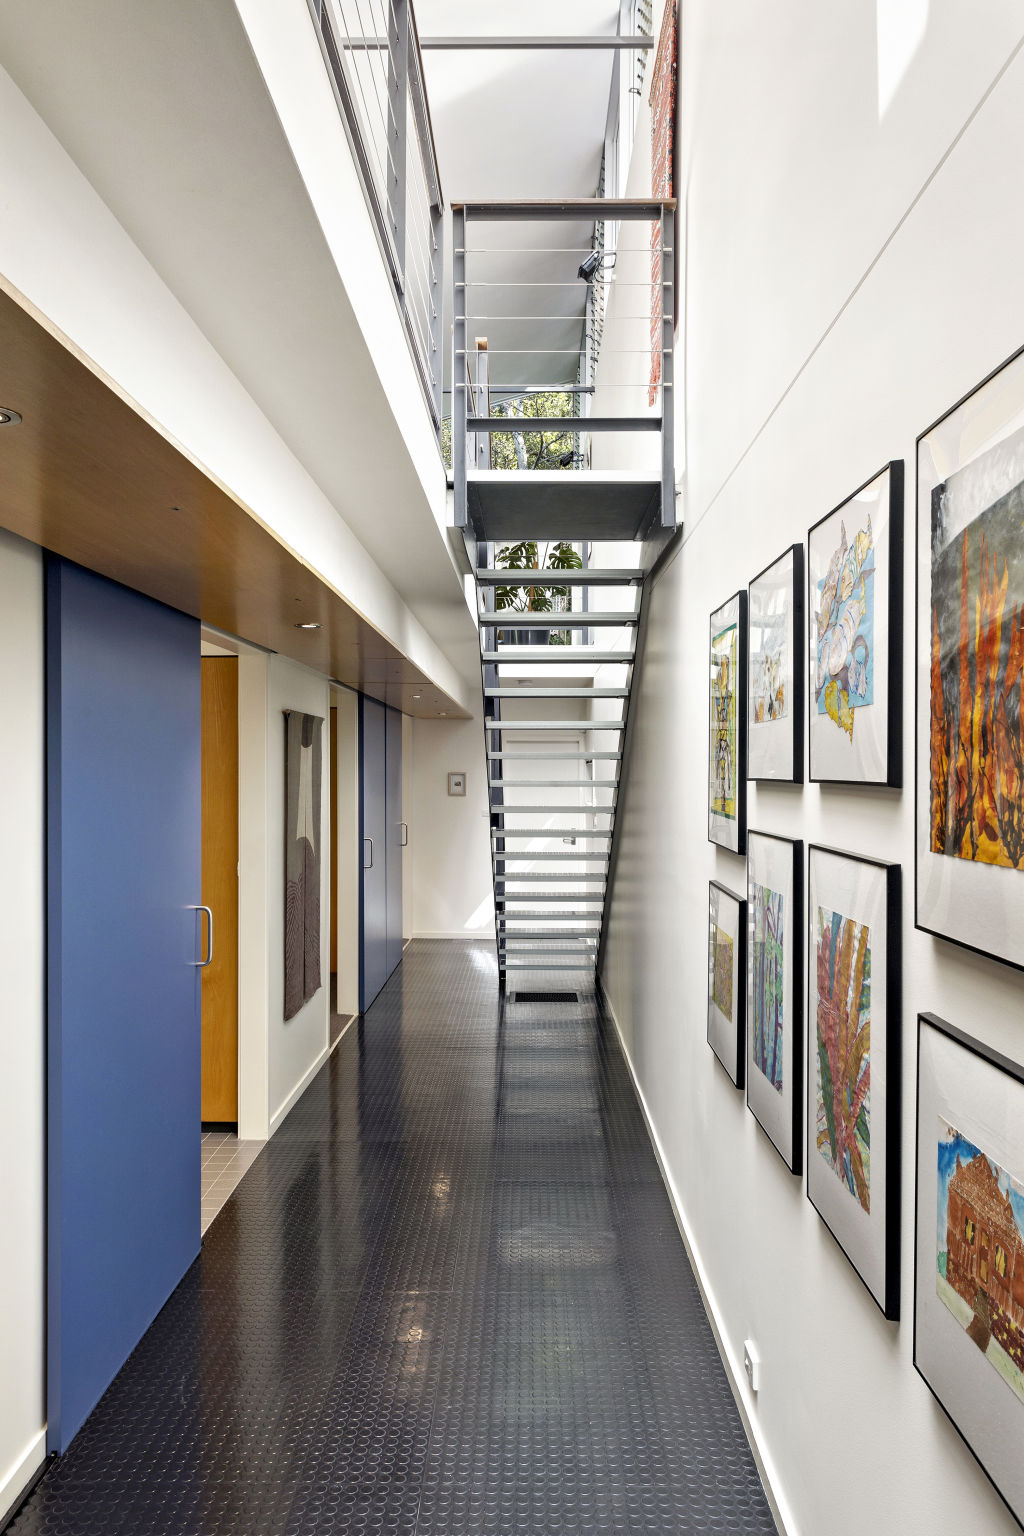 The open-tread staircase leads to the lower level which features a gallery-style hallway. Photo: Supplied